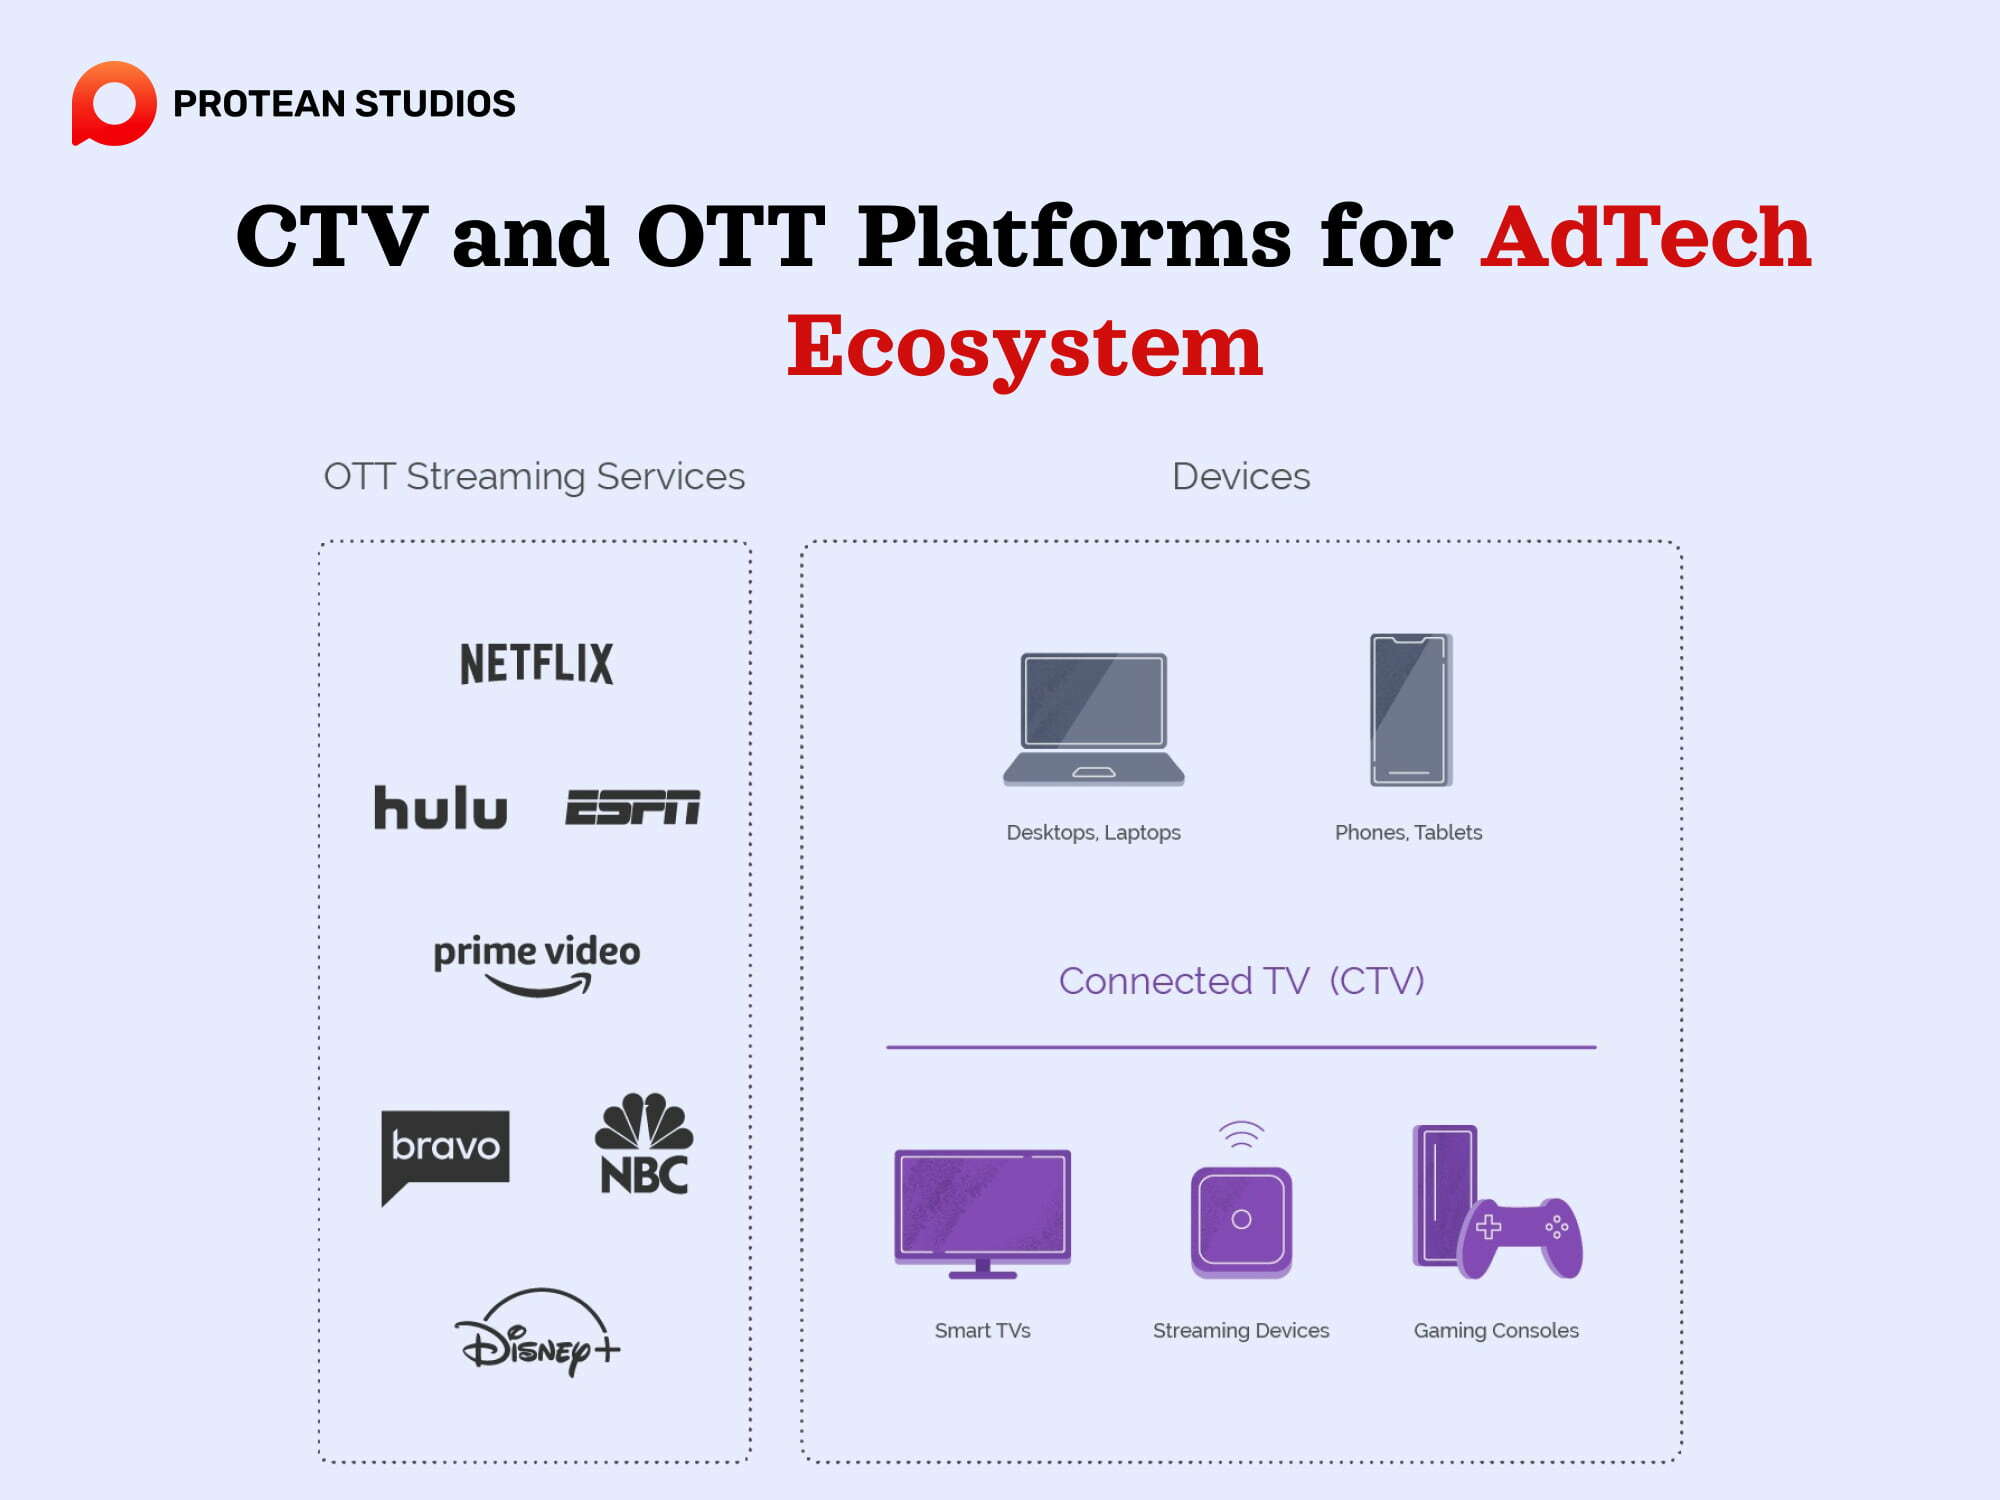 Examples of CTV and OTT platforms for advertising